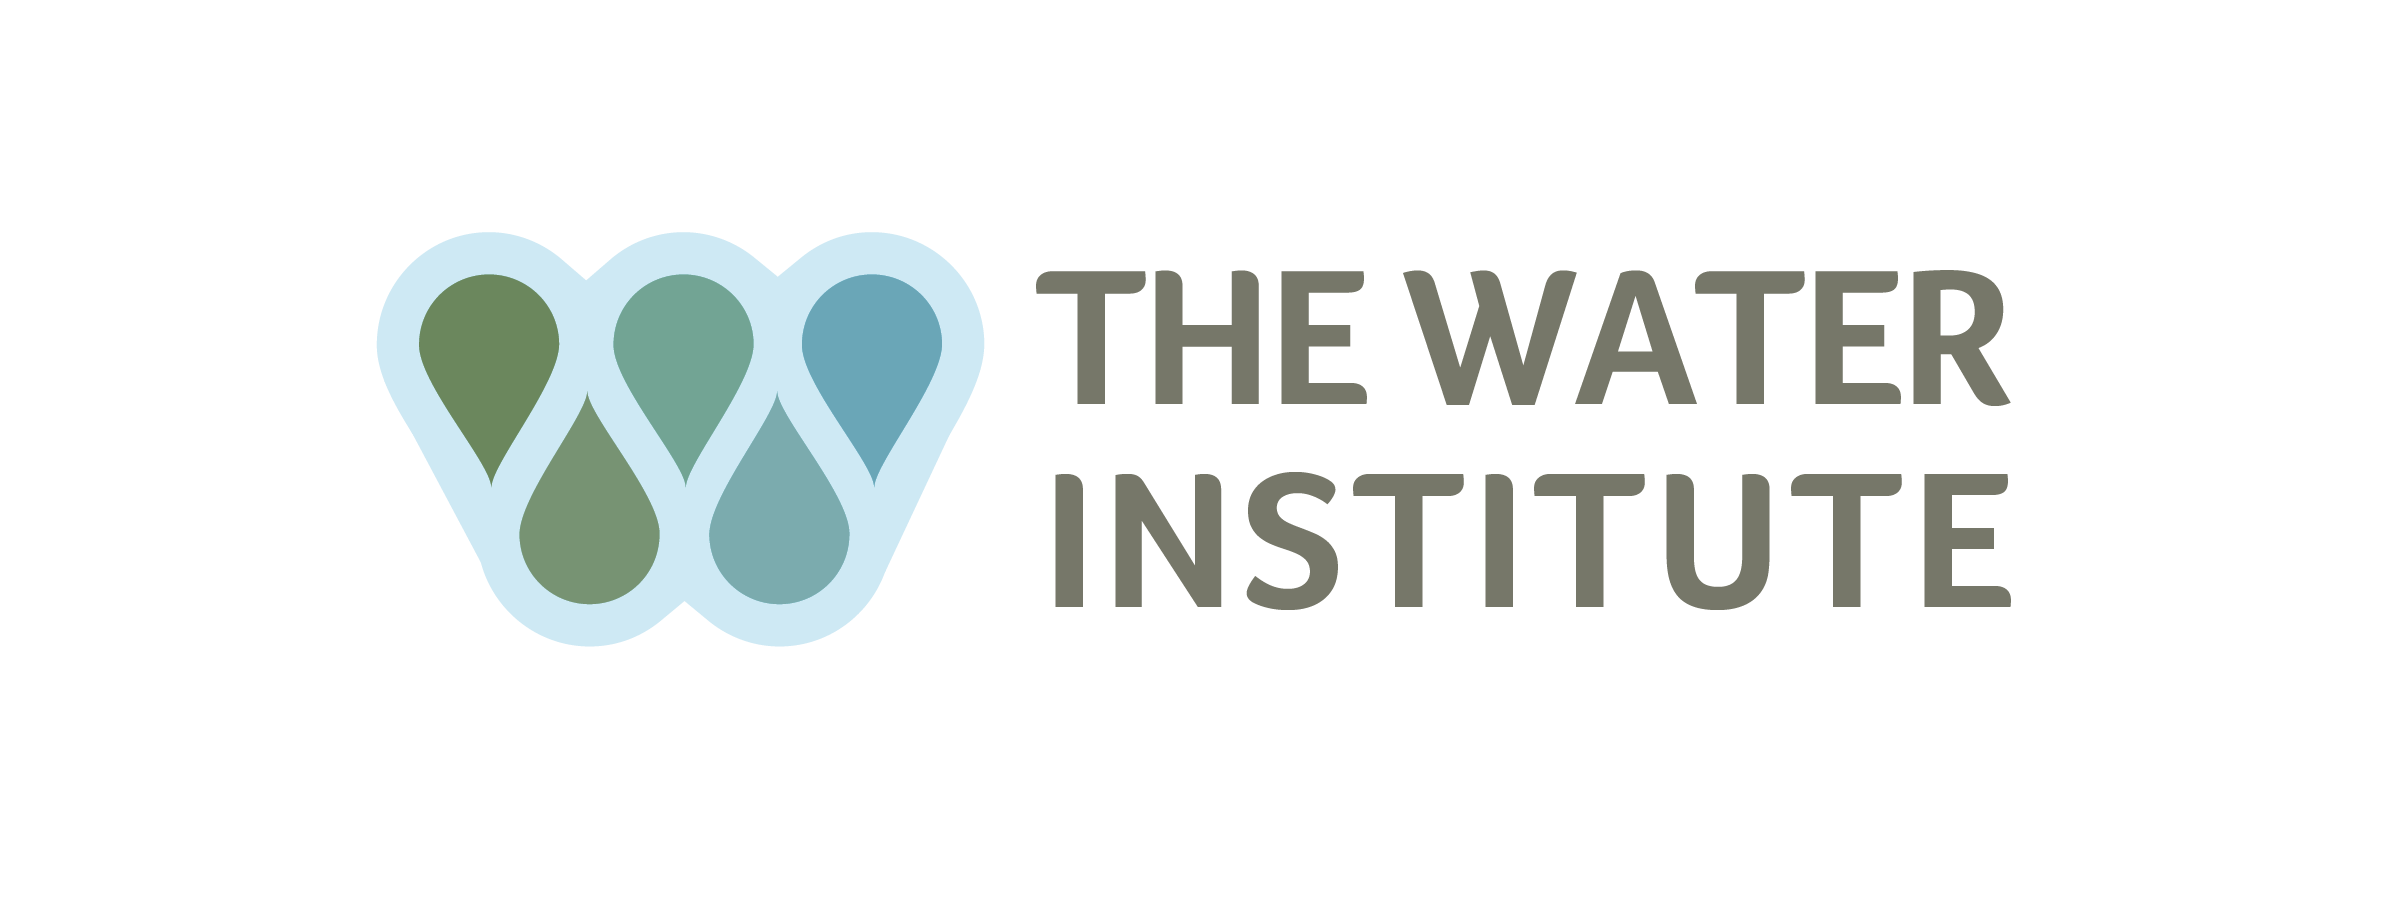 The Water Institute